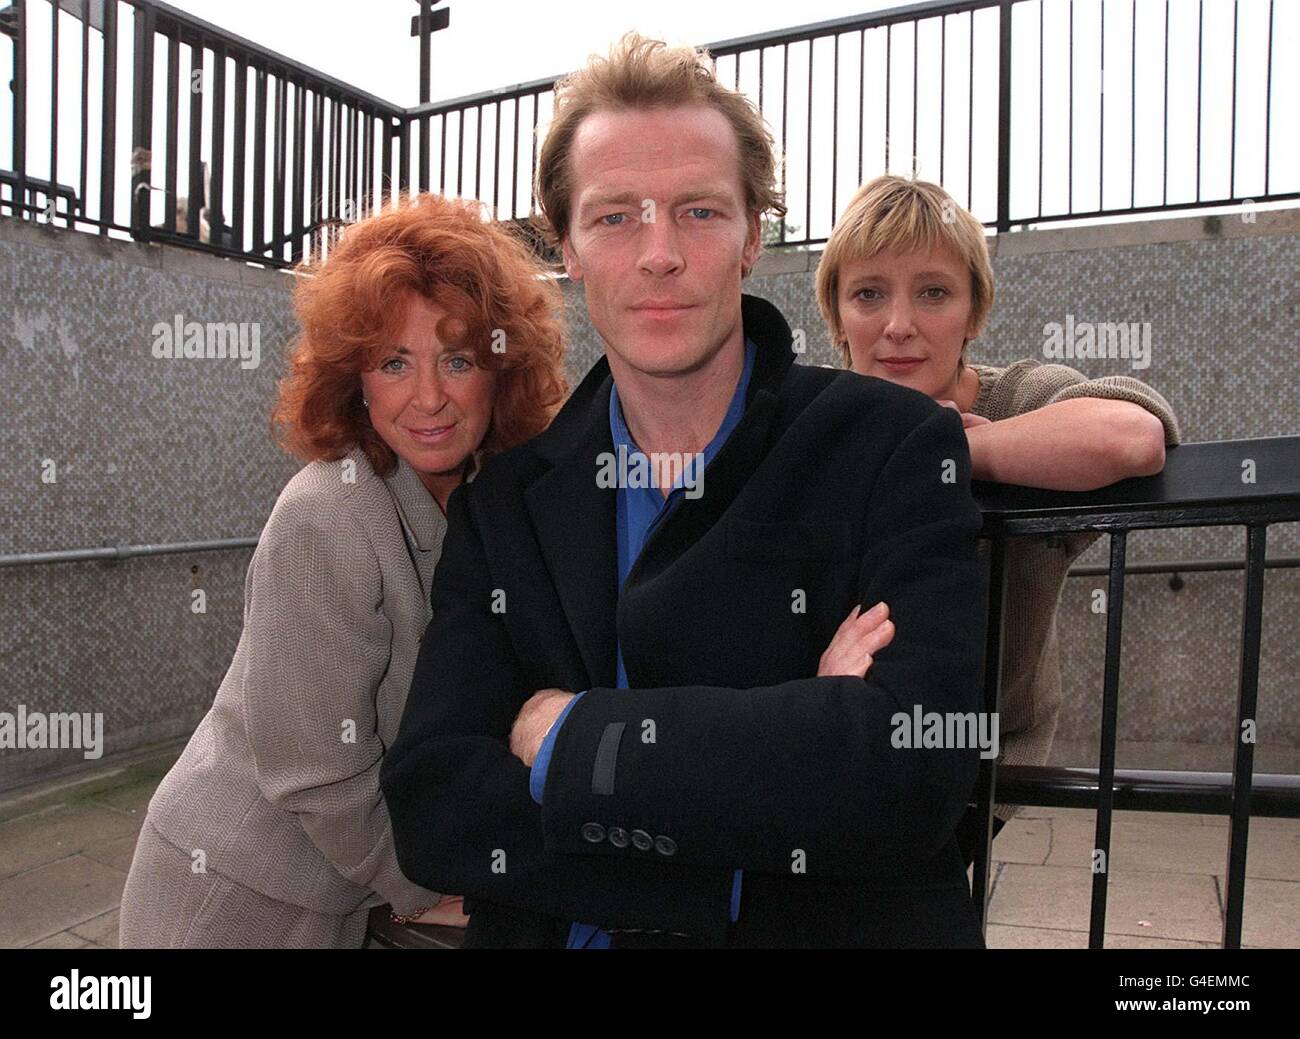 From left to right; Lynda La Plante, Iain Glenn and Kate Buffery. Iain Glenn who plays Damon Morton and is also starring with Nicole Kidman in the West End play The Blue room with Kate Buffery who plays D.I. Pat North are starring in Lynda La Plante's Trial and Retribution 2 a 2 x 2 hour drama series for ITV. Photo by Rosie Hallam/PA. Stock Photo